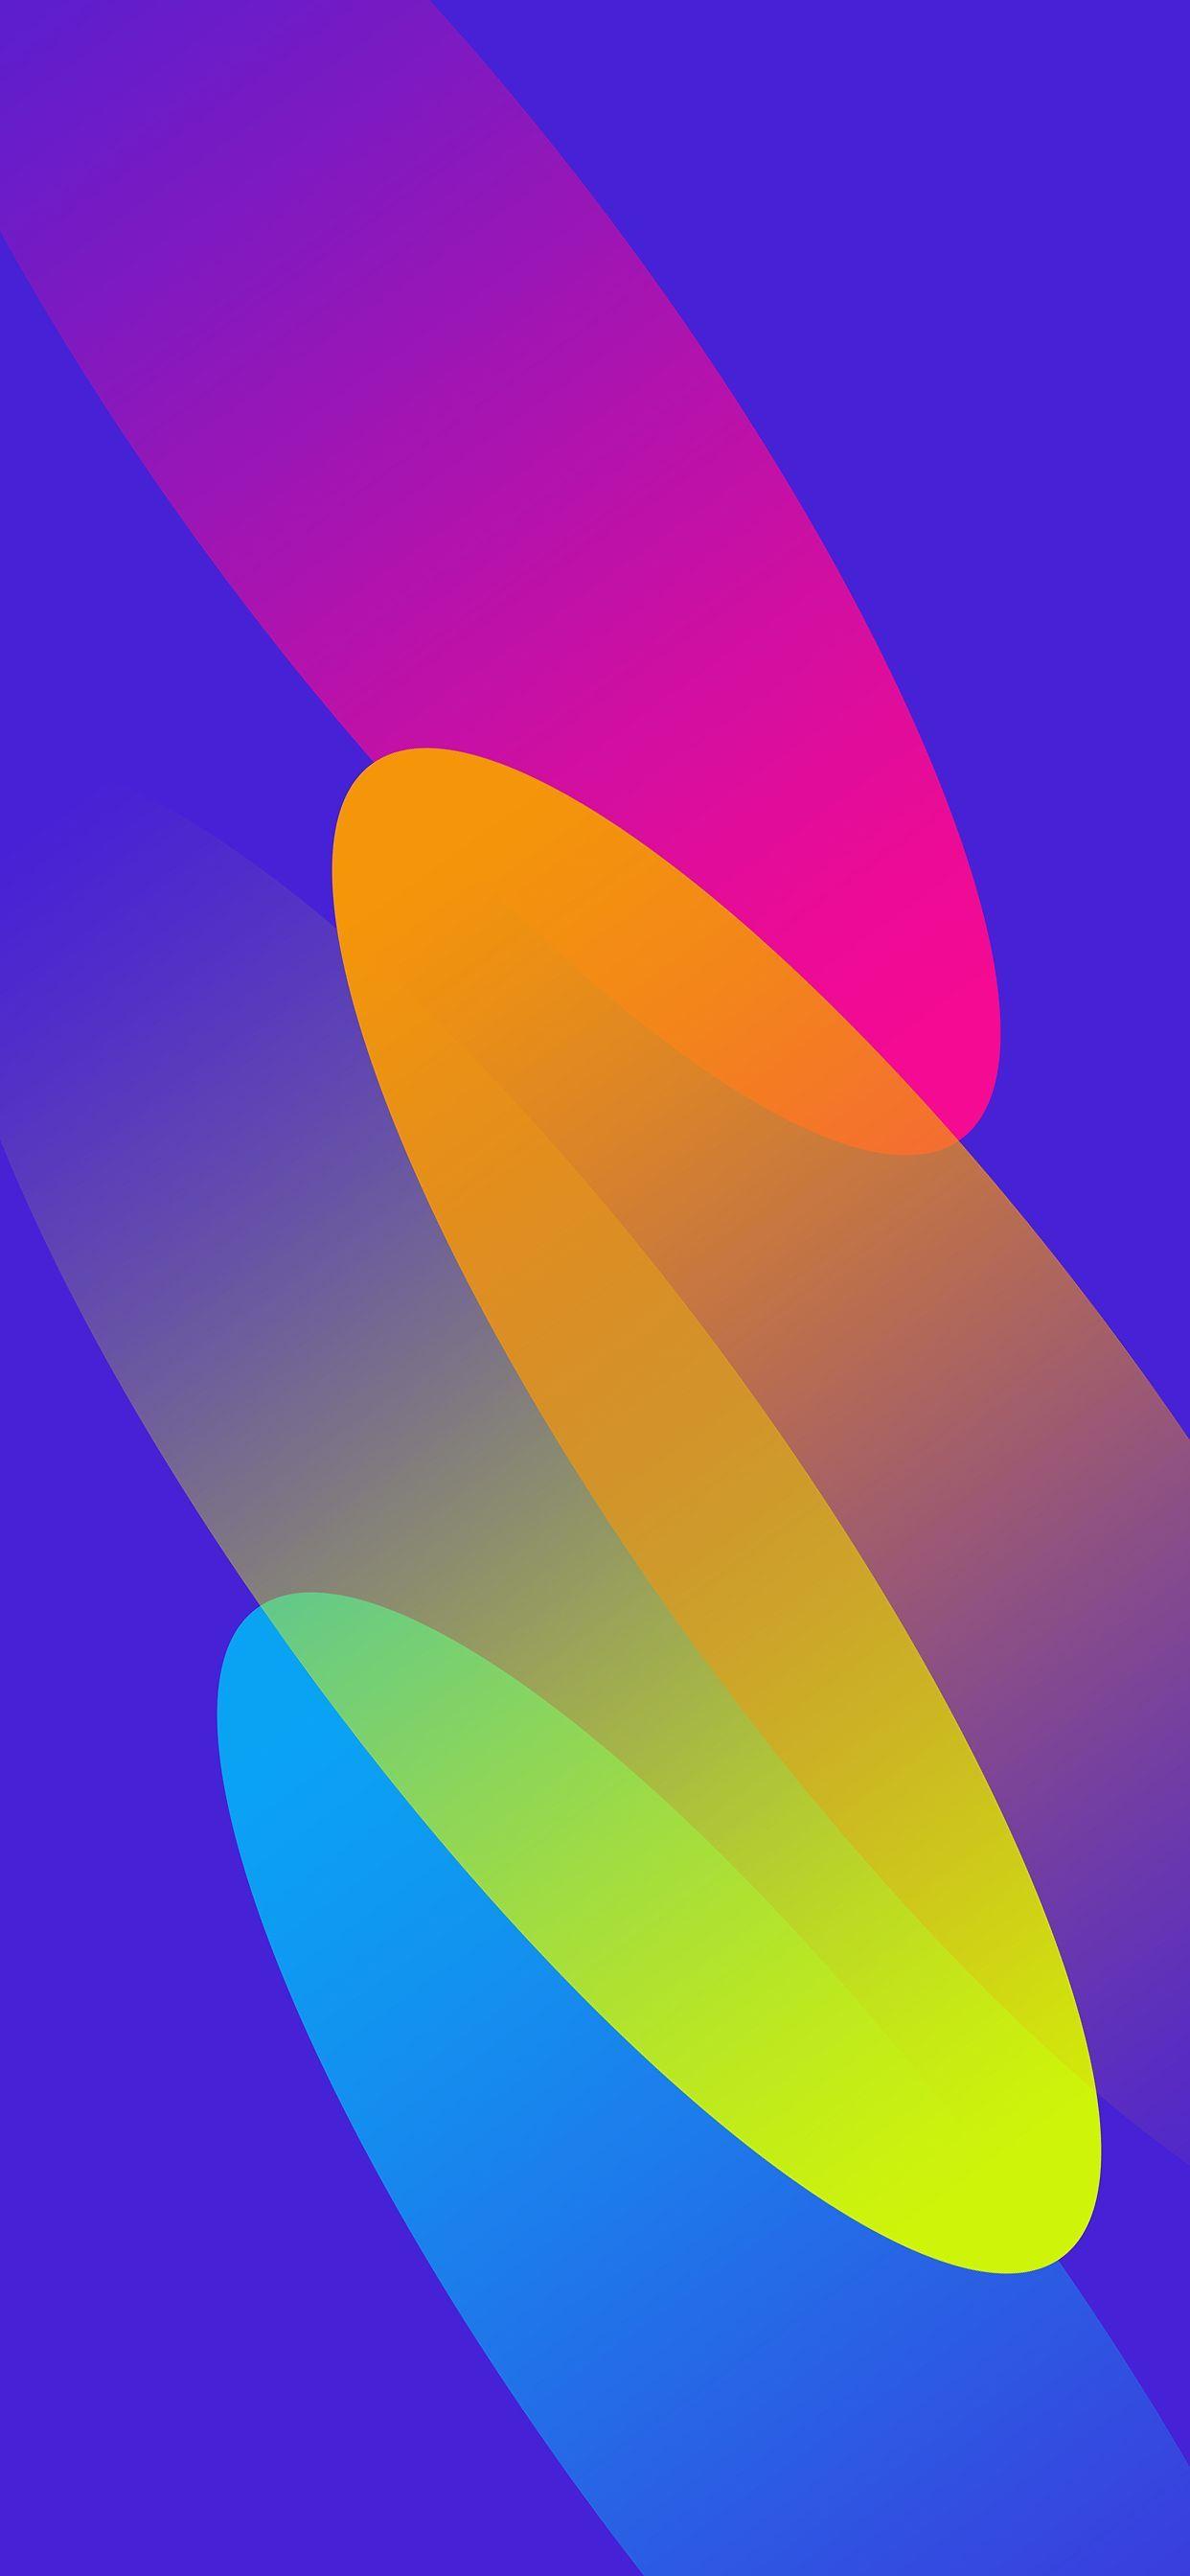 iphoe Xs Max Wallpaper. Abstract iphone wallpaper, Colorful